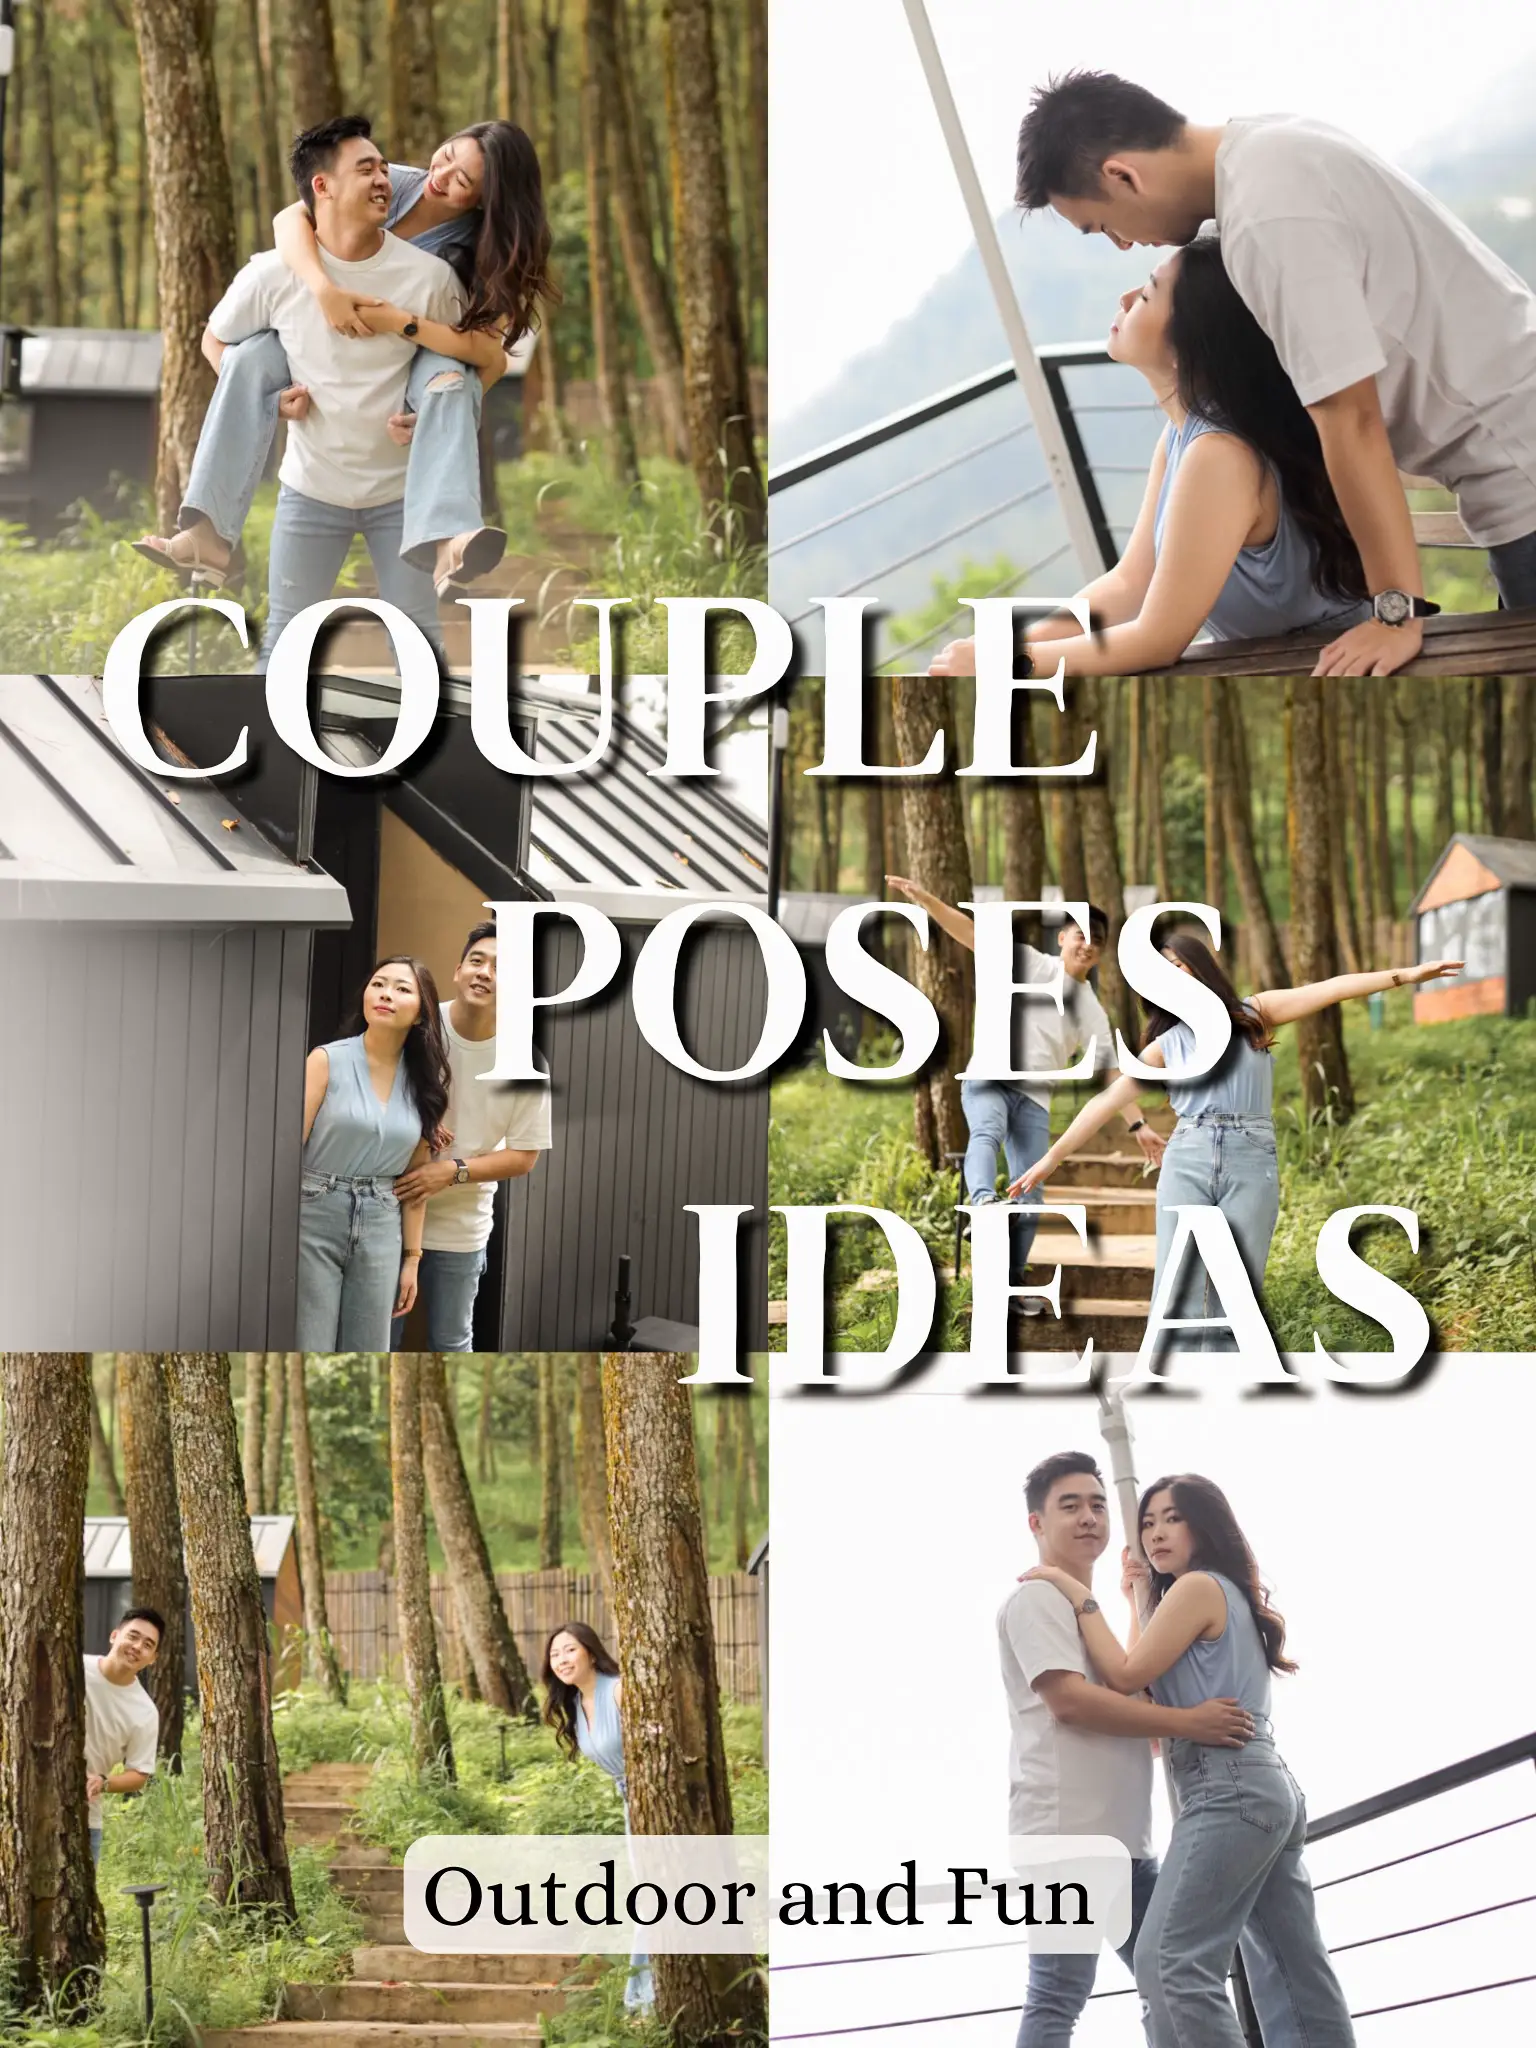 anna rupprecht recommends Photo Poses For Couples Outdoors